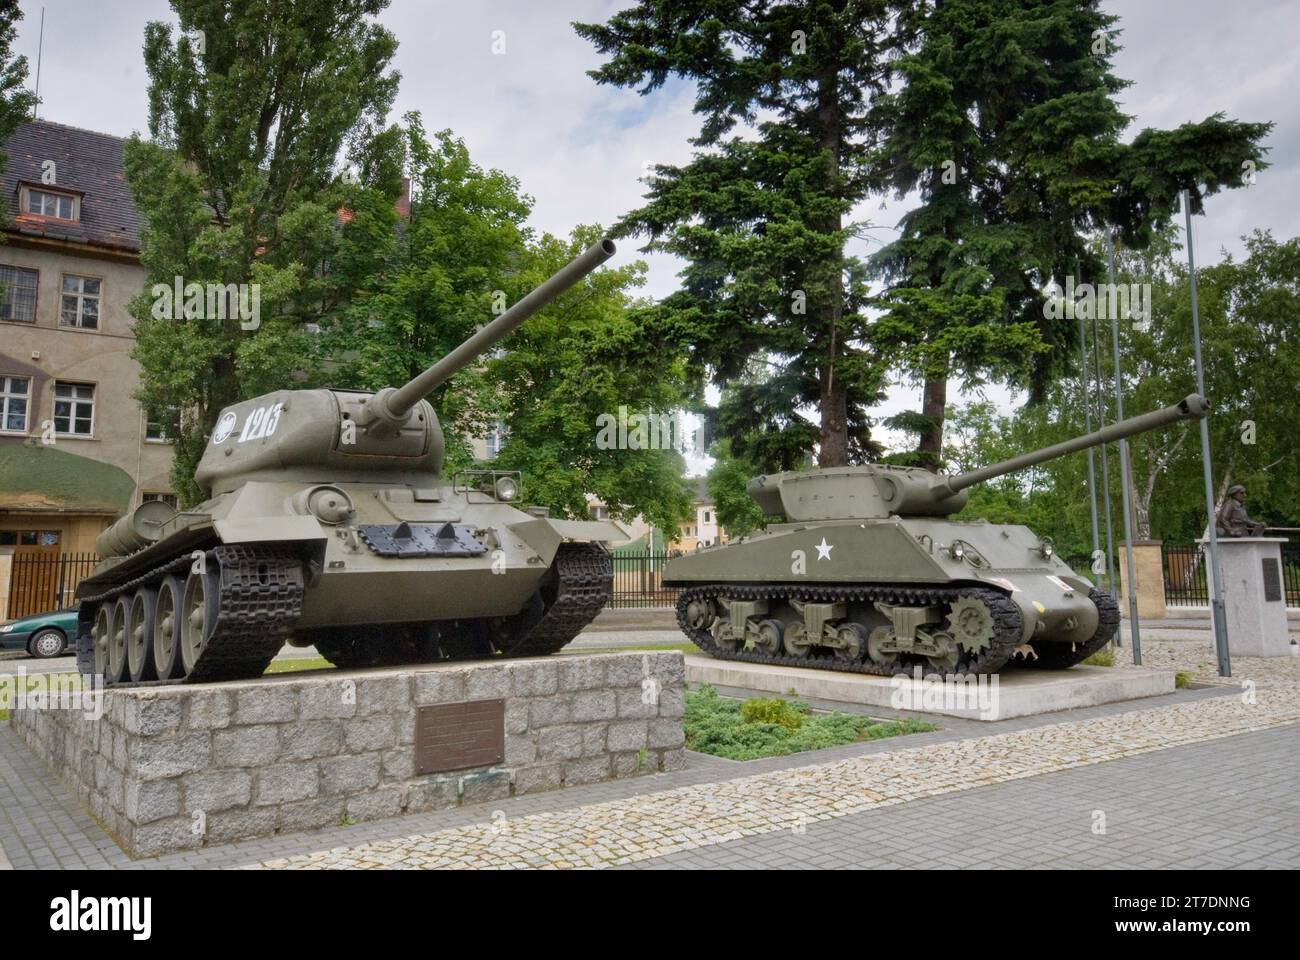 Soviet T-34 and American M-36 Sherman tanks from WWII displayed at headquarters of II Lubuska Armored Cavalry Division near Żagań, Poland Stock Photo